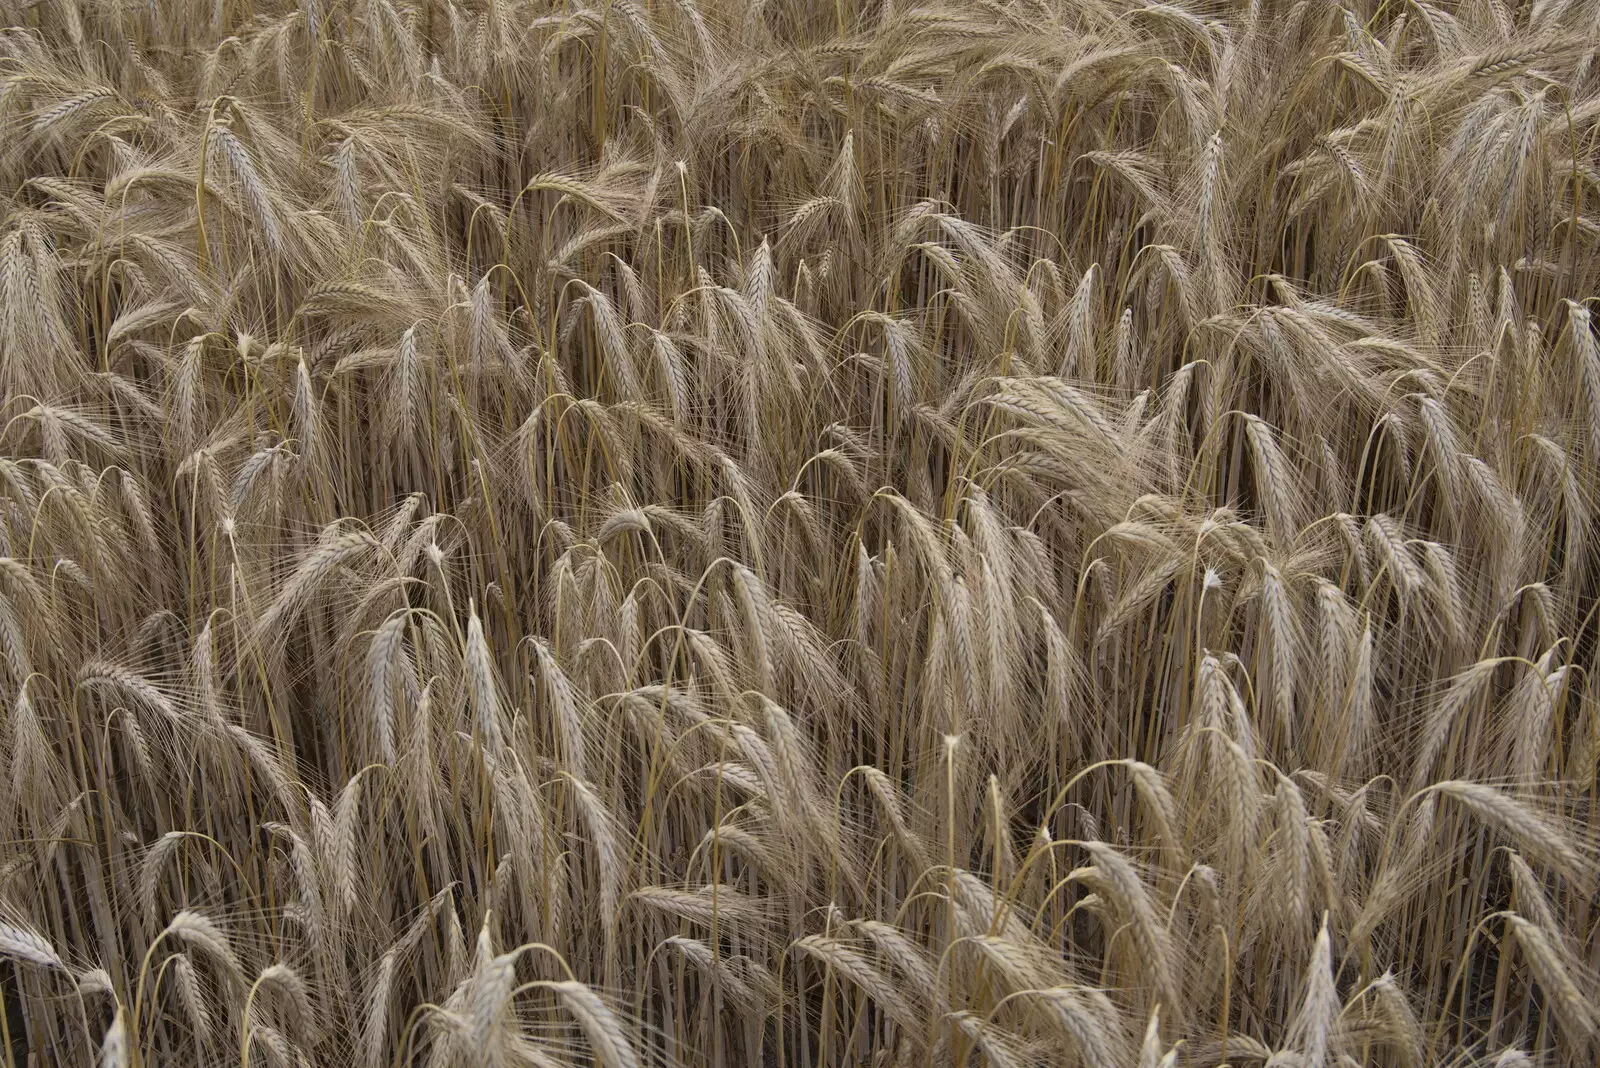 A field of barley, from Meg-fest, and Sean Visits, Bressingham and Brome, Suffolk - 1st August 2021